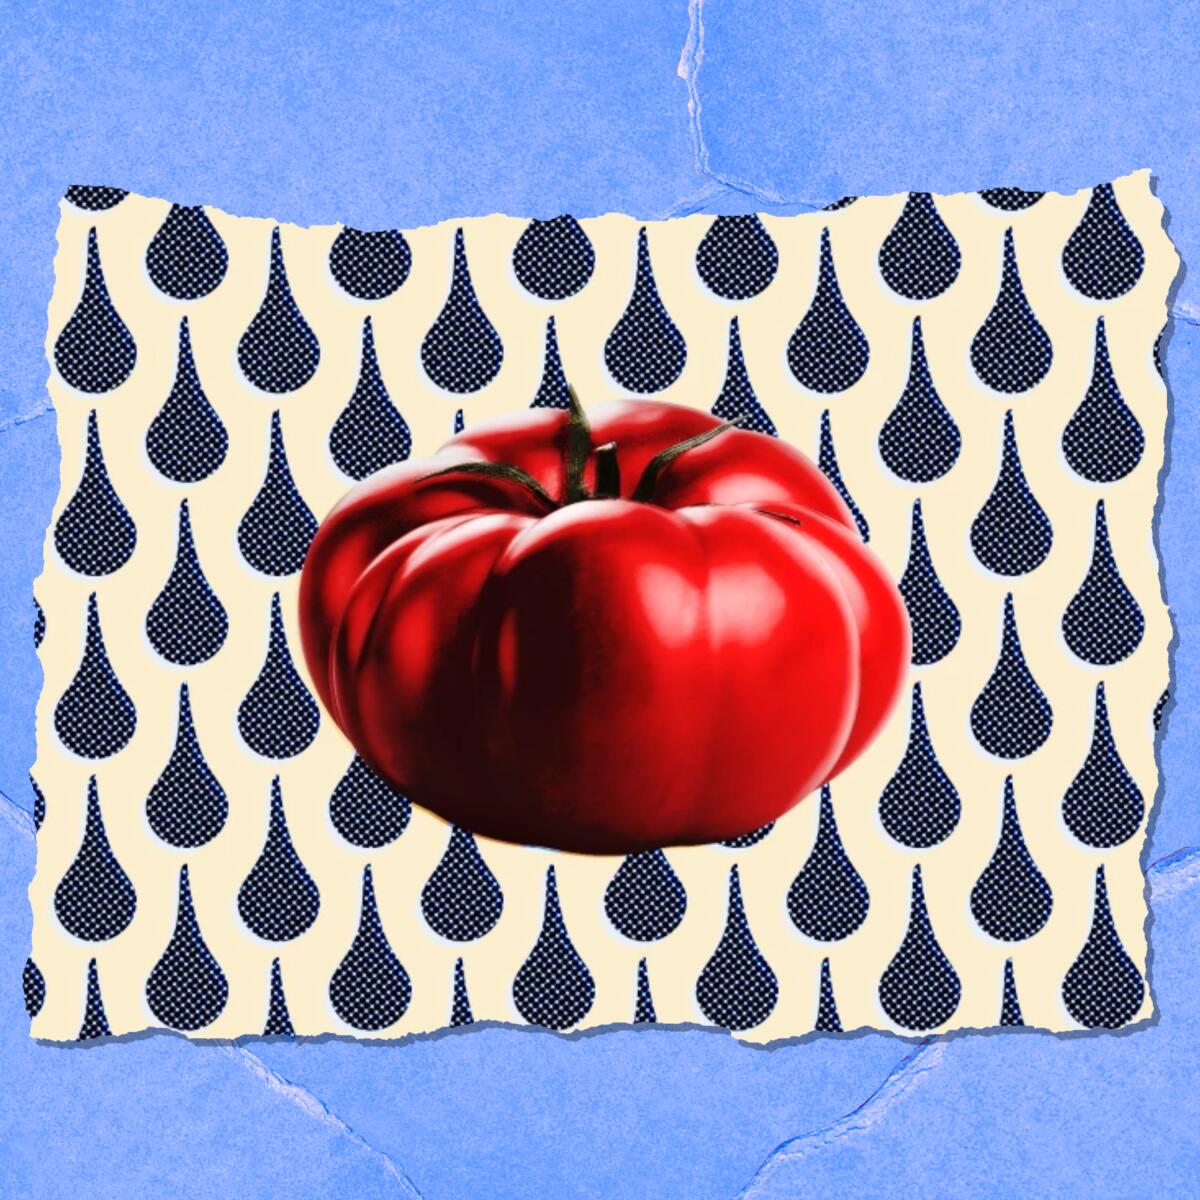 A red tomato